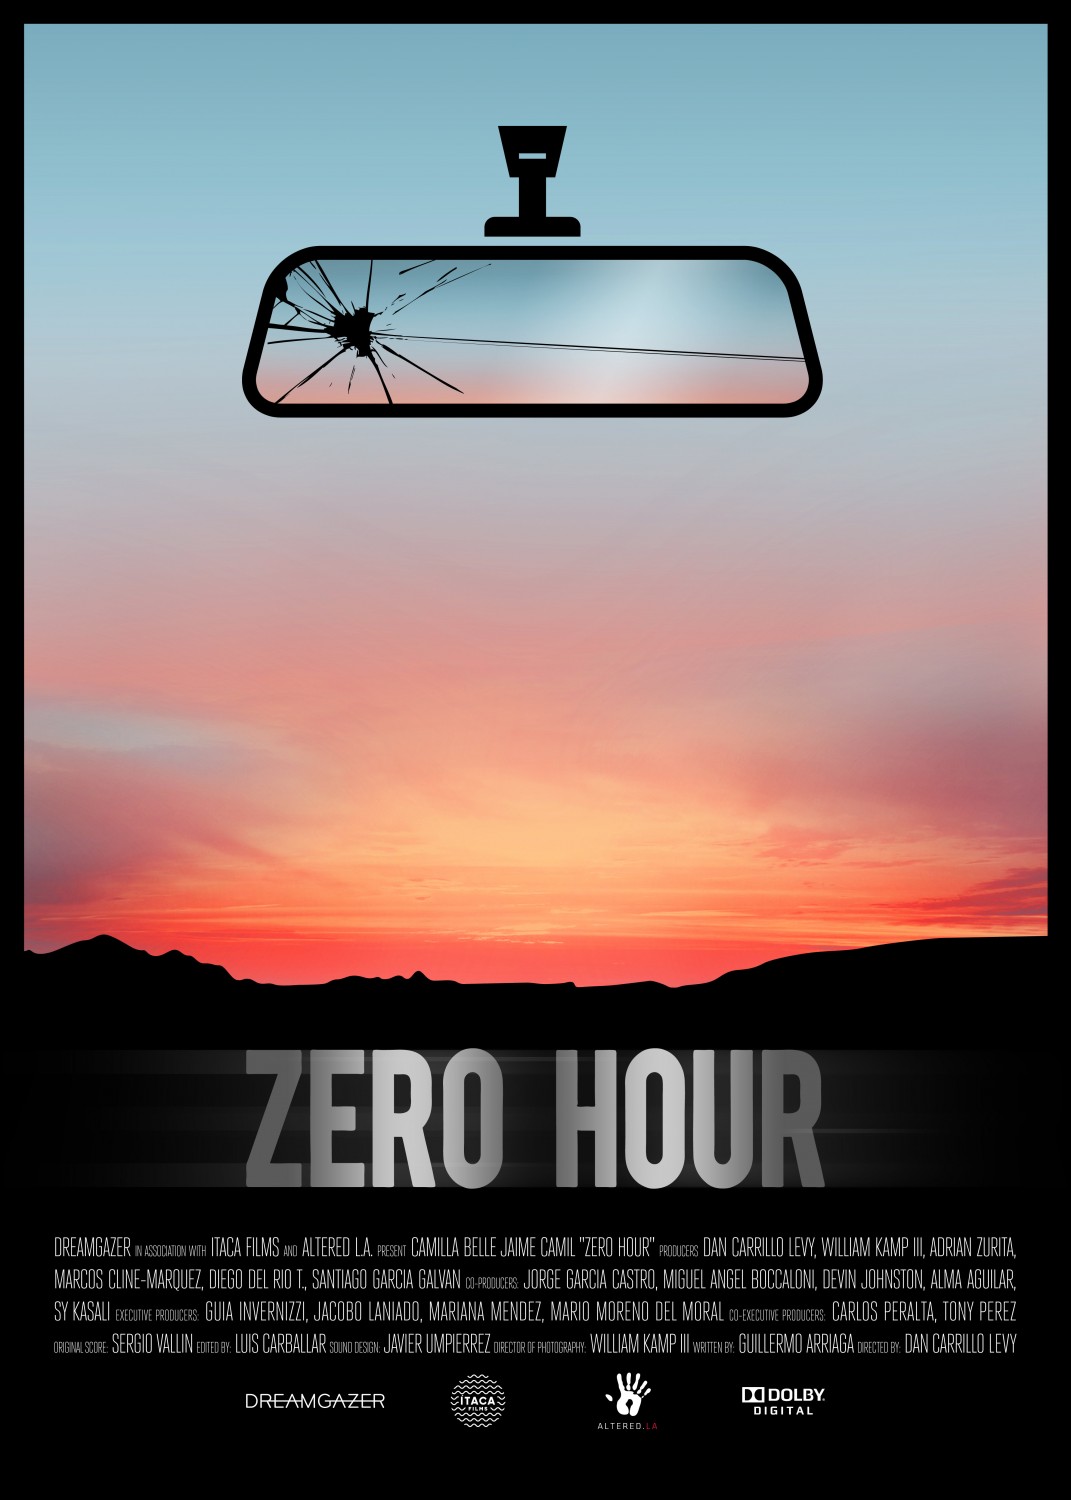 Extra Large Movie Poster Image for Zero Hour